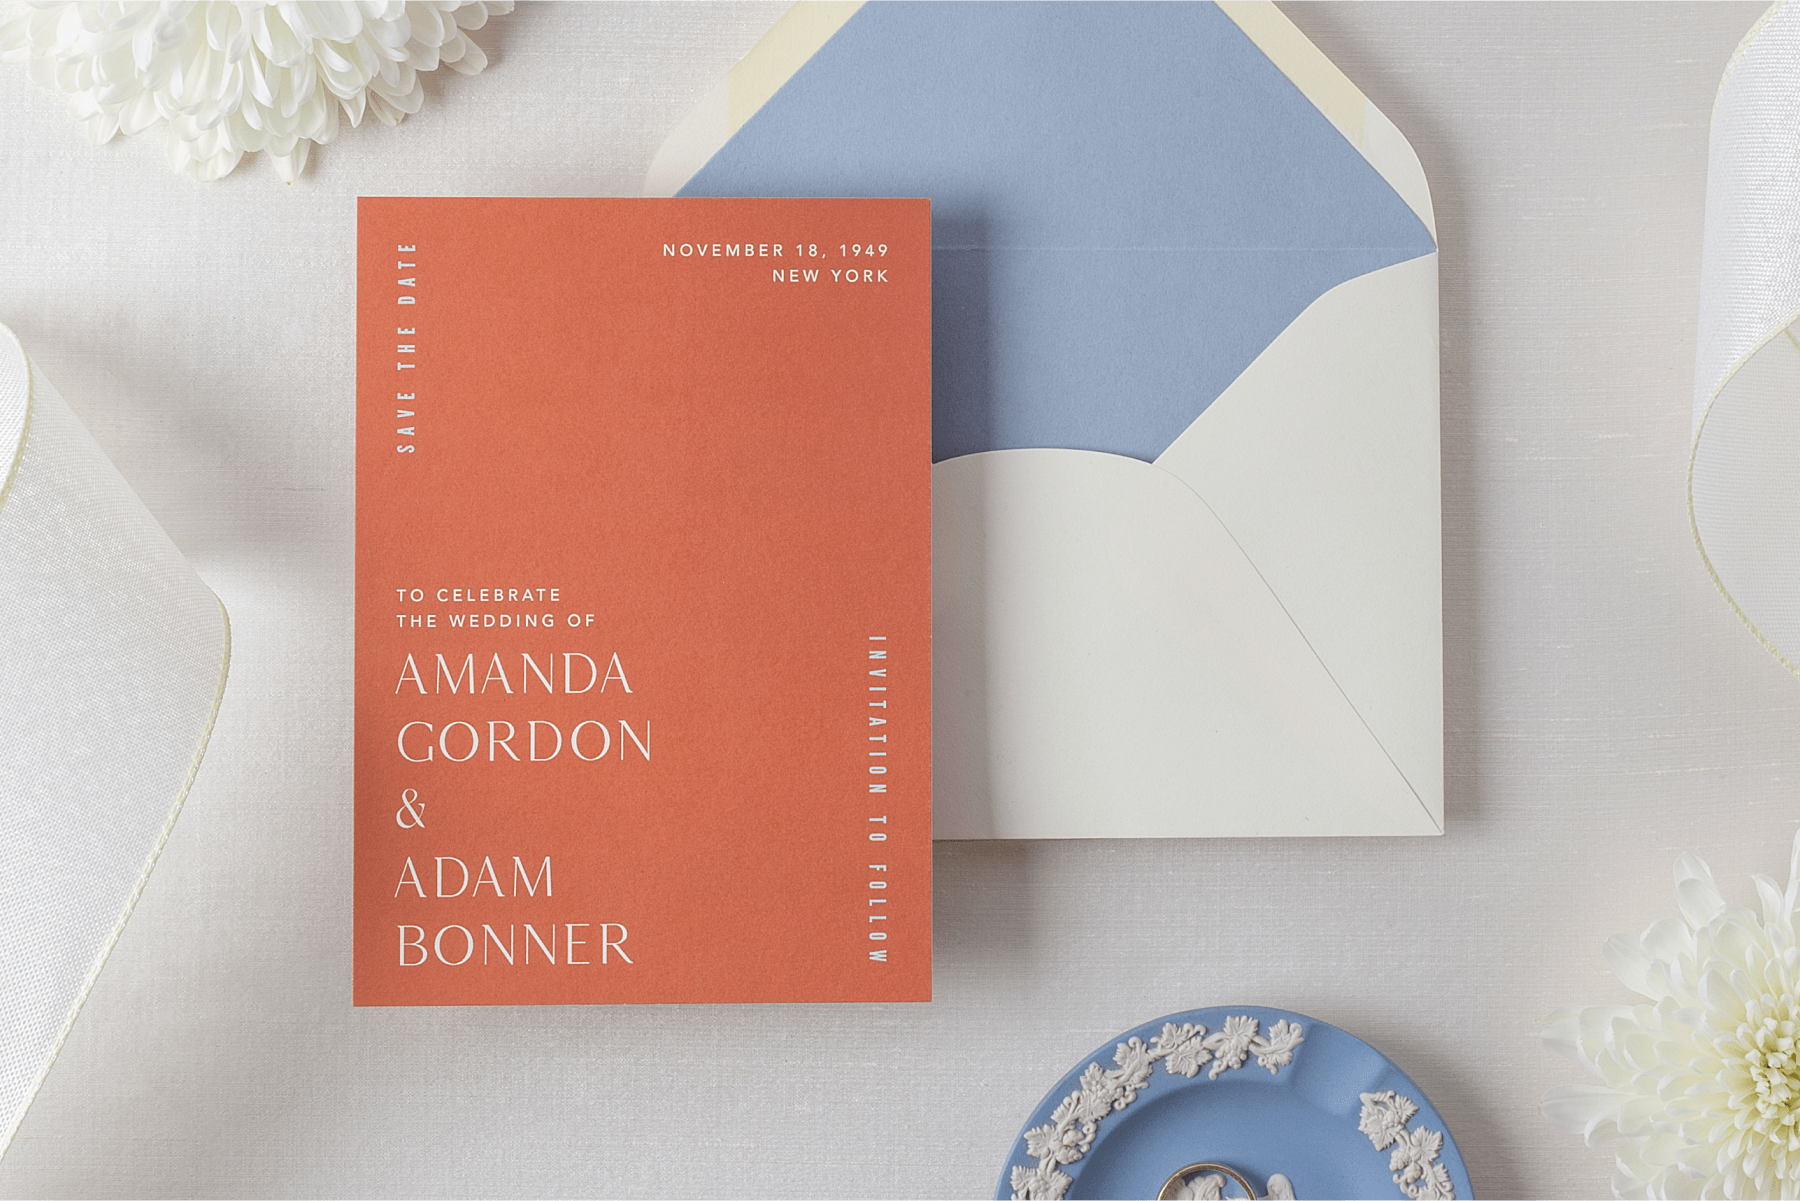 A salmon-colored save the date with white text with a white envelope with blue lining.